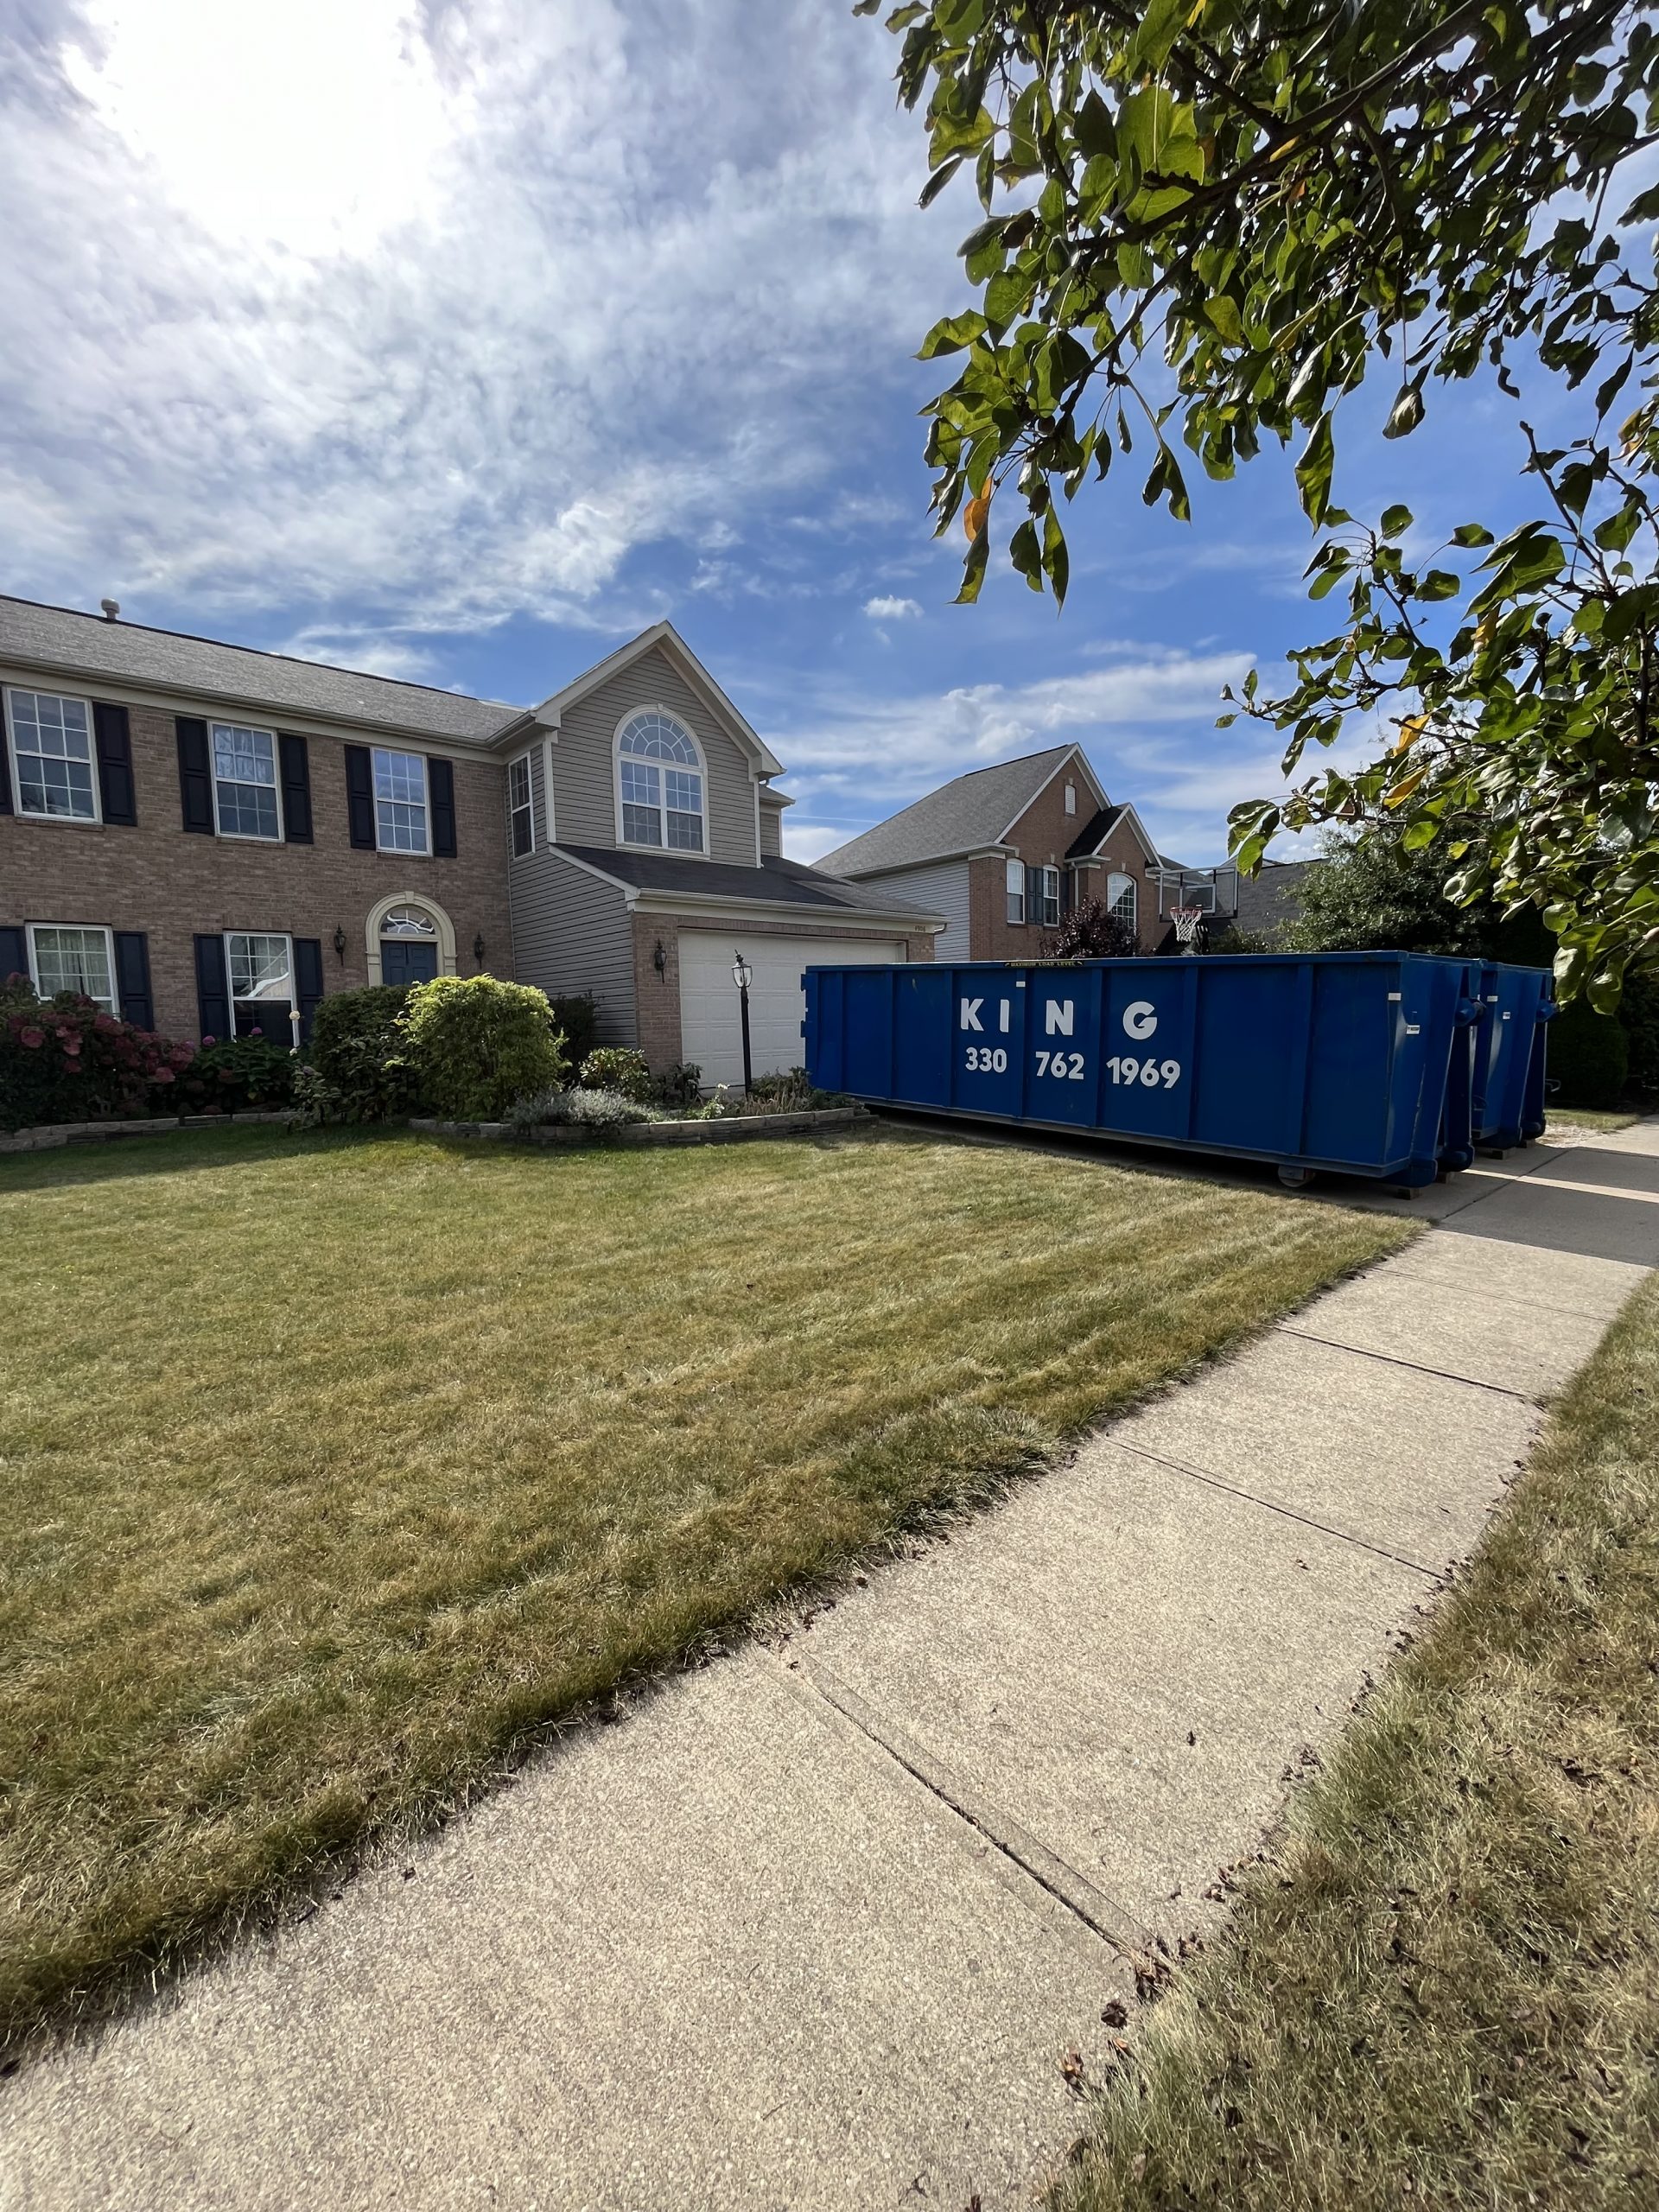 30 cubic yard roll off dumpster in driveway